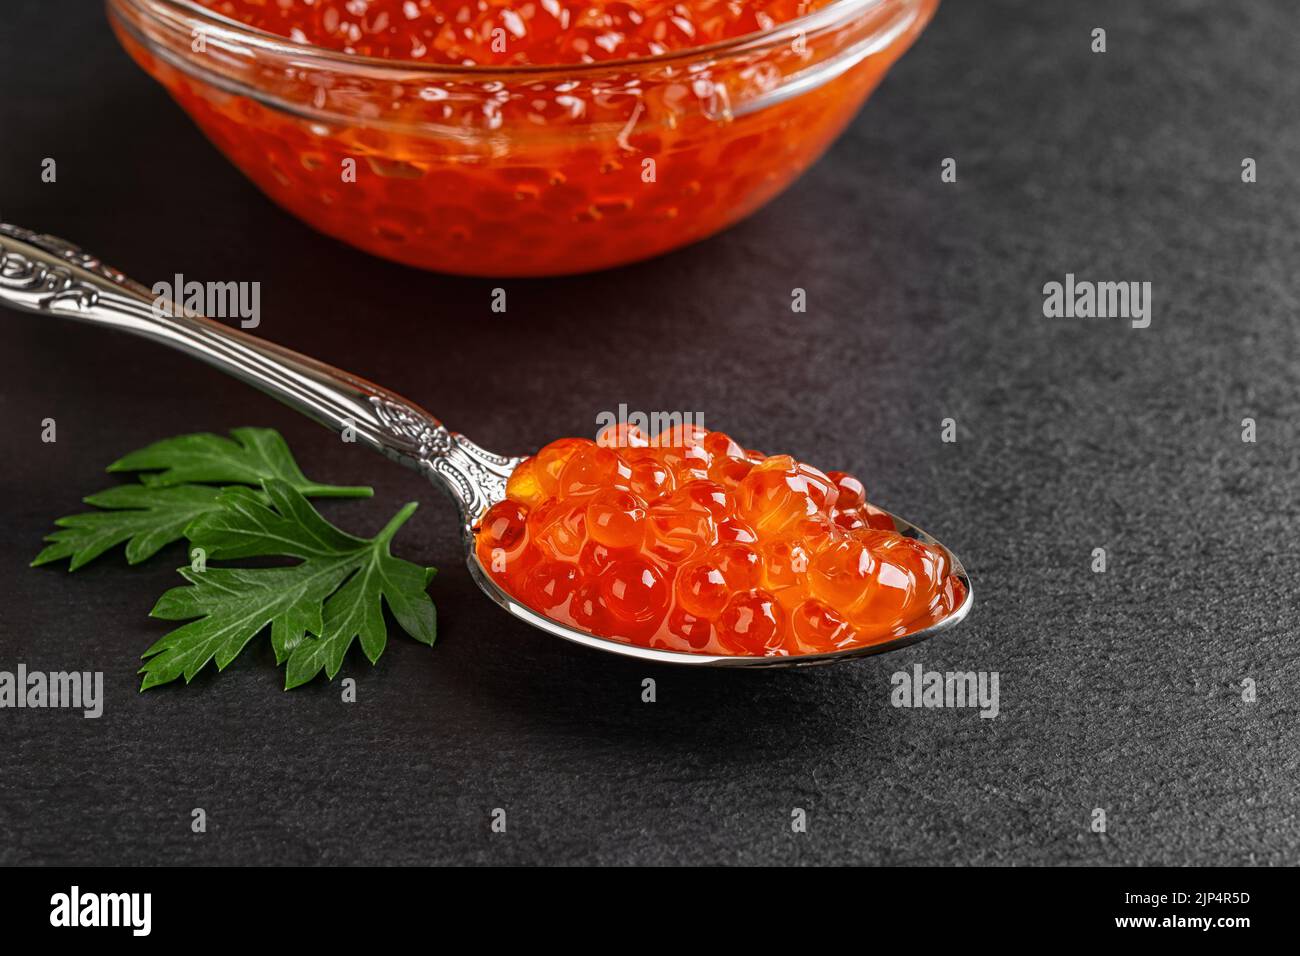 Salmon red caviar in a spoon on a black slate background. Vintage spoon full of trout caviar and parsley leaf close-up. Seafood fish delicacy. Stock Photo